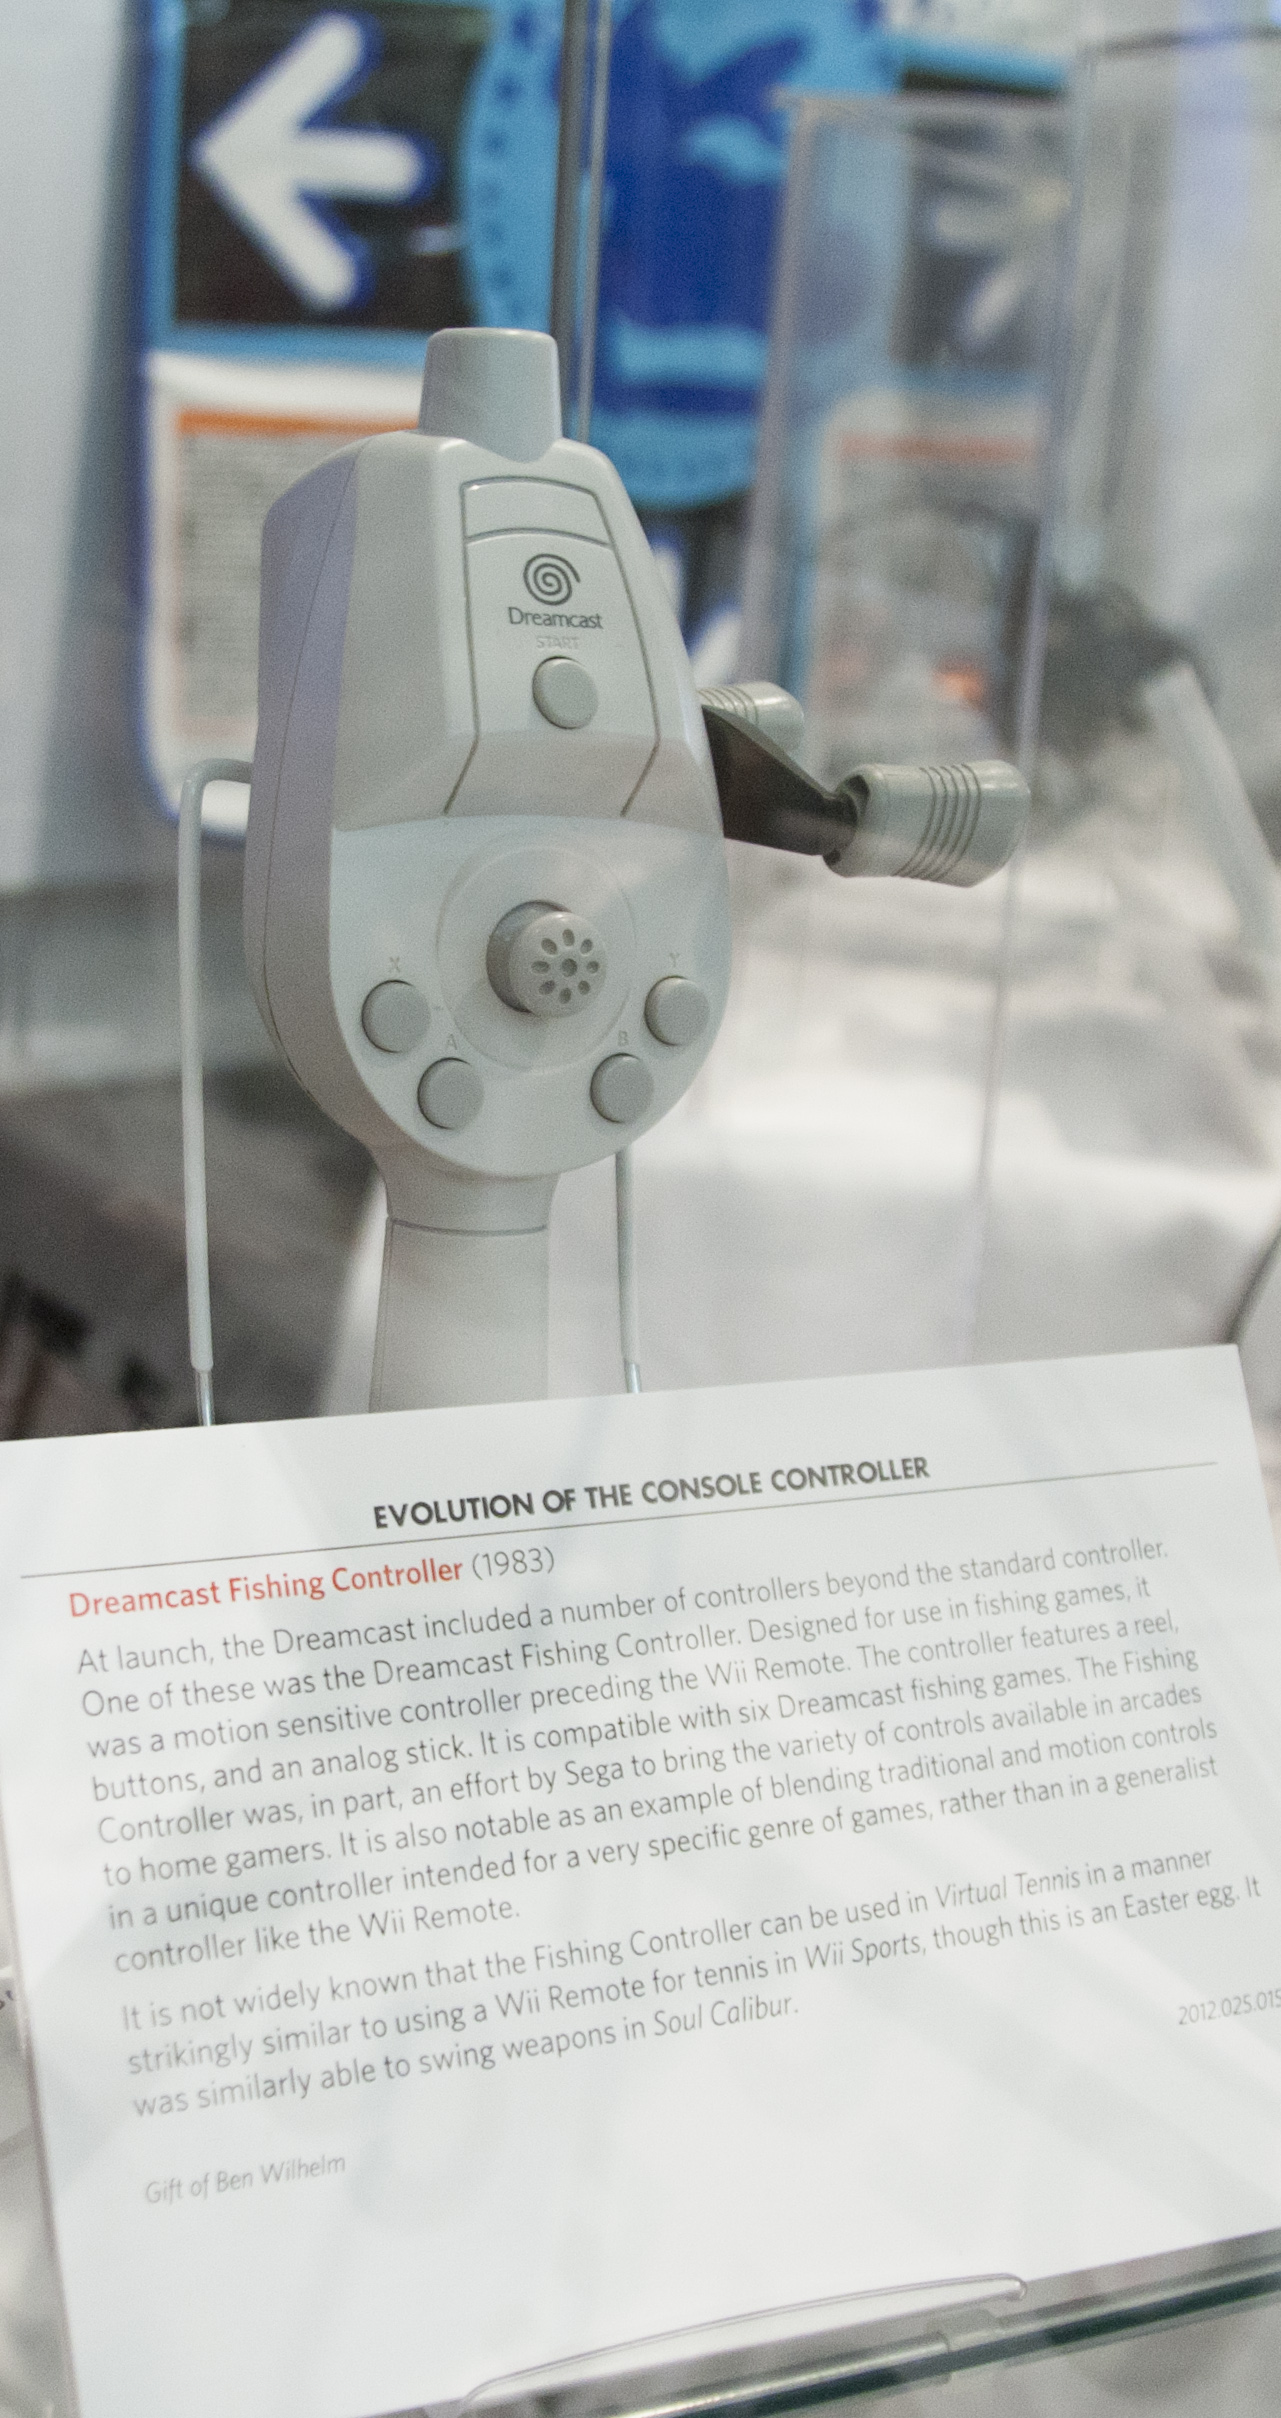 File:Dreamcast fishing controller (7973429704).jpg - Wikimedia Commons